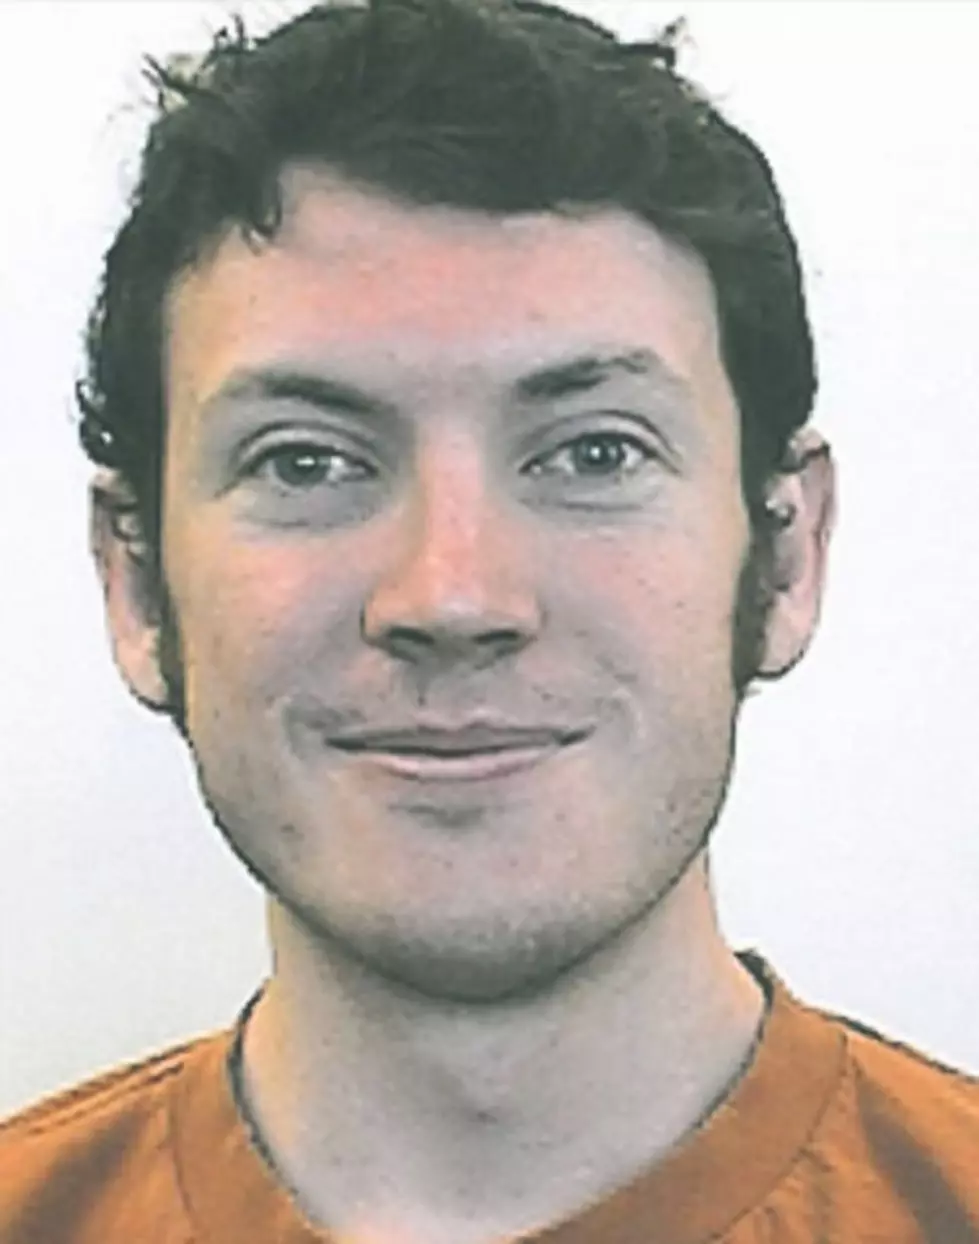 Photo Surfaces of &#8216;Dark Knight Rises&#8217; Shooting Suspect James Holmes